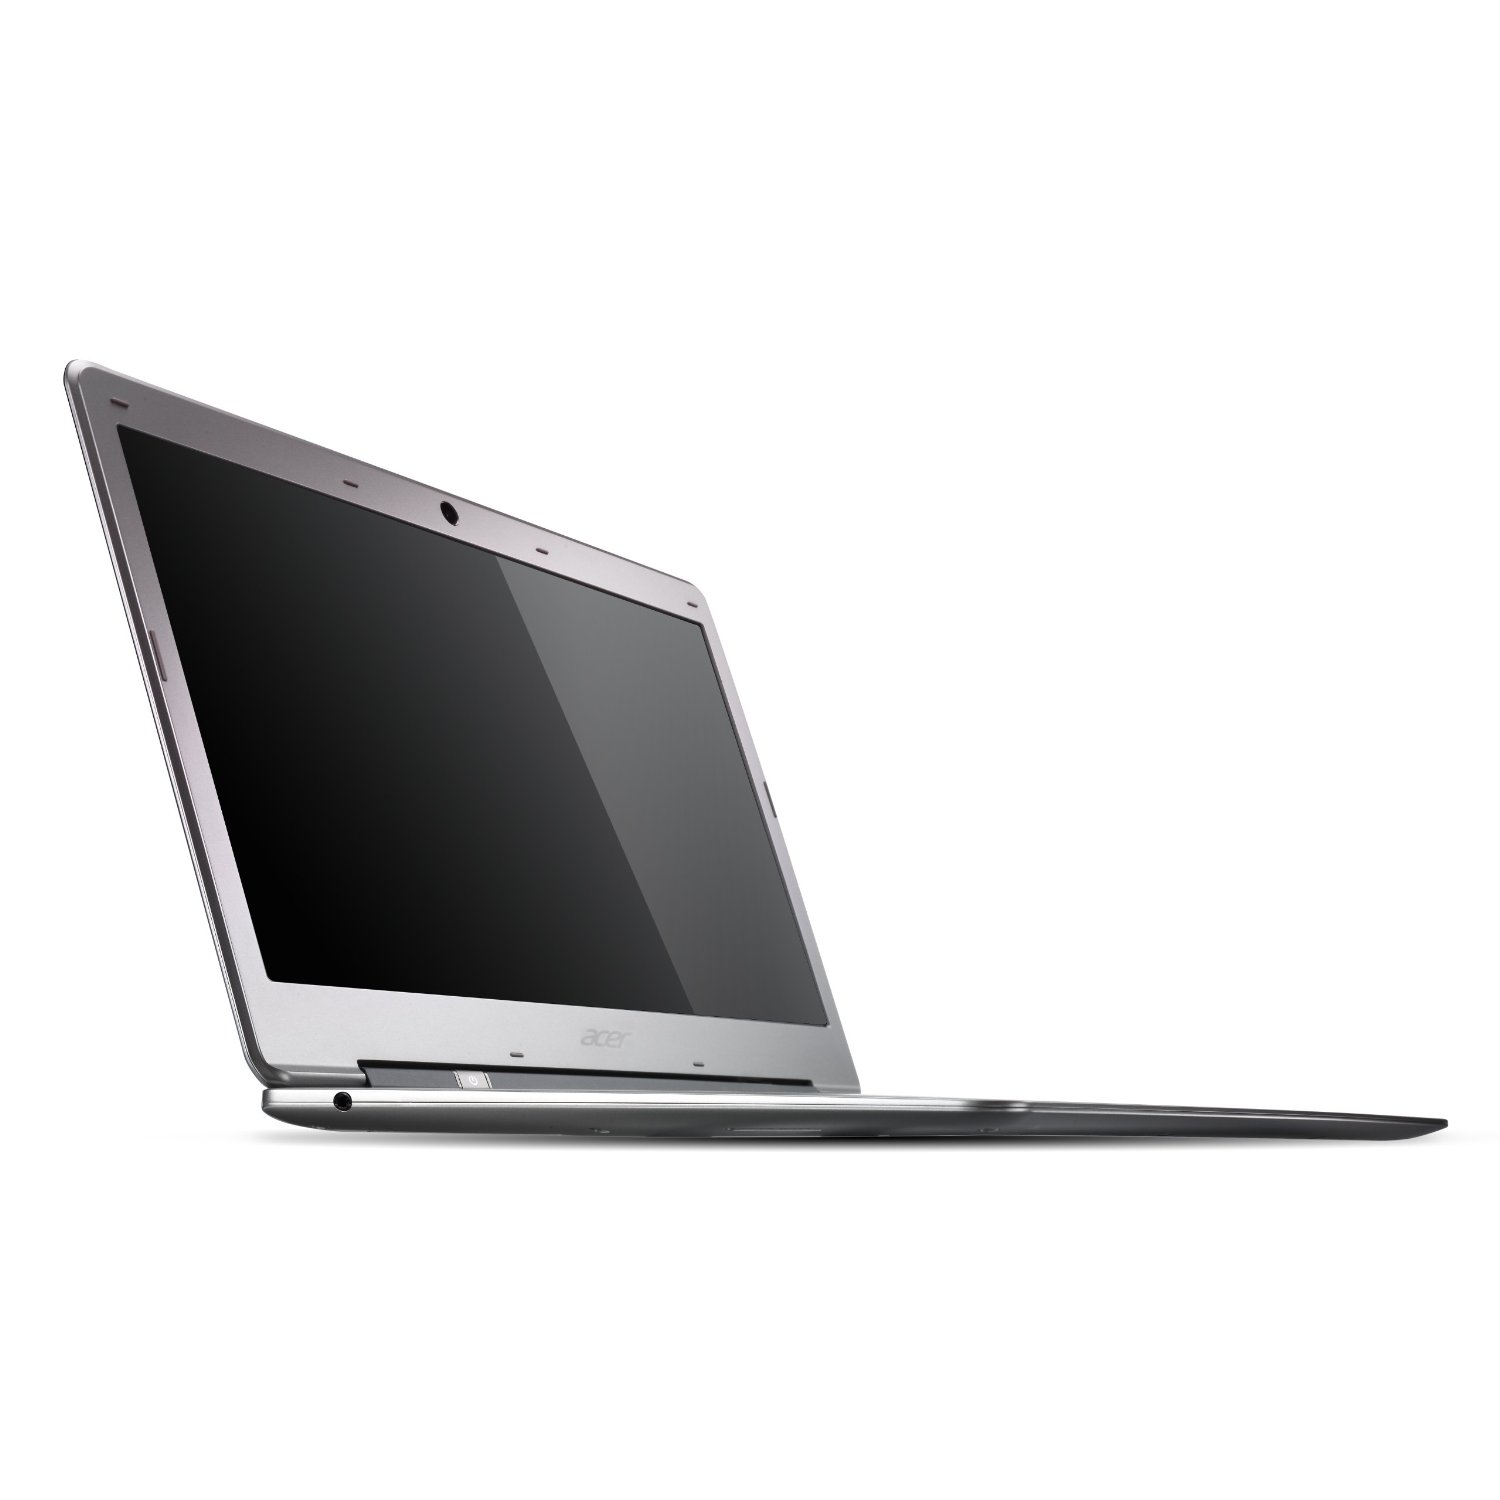 http://thetechjournal.com/wp-content/uploads/images/1111/1322192769-acer-aspire-s39516828-133inch-hd-display-ultrabook-7.jpg